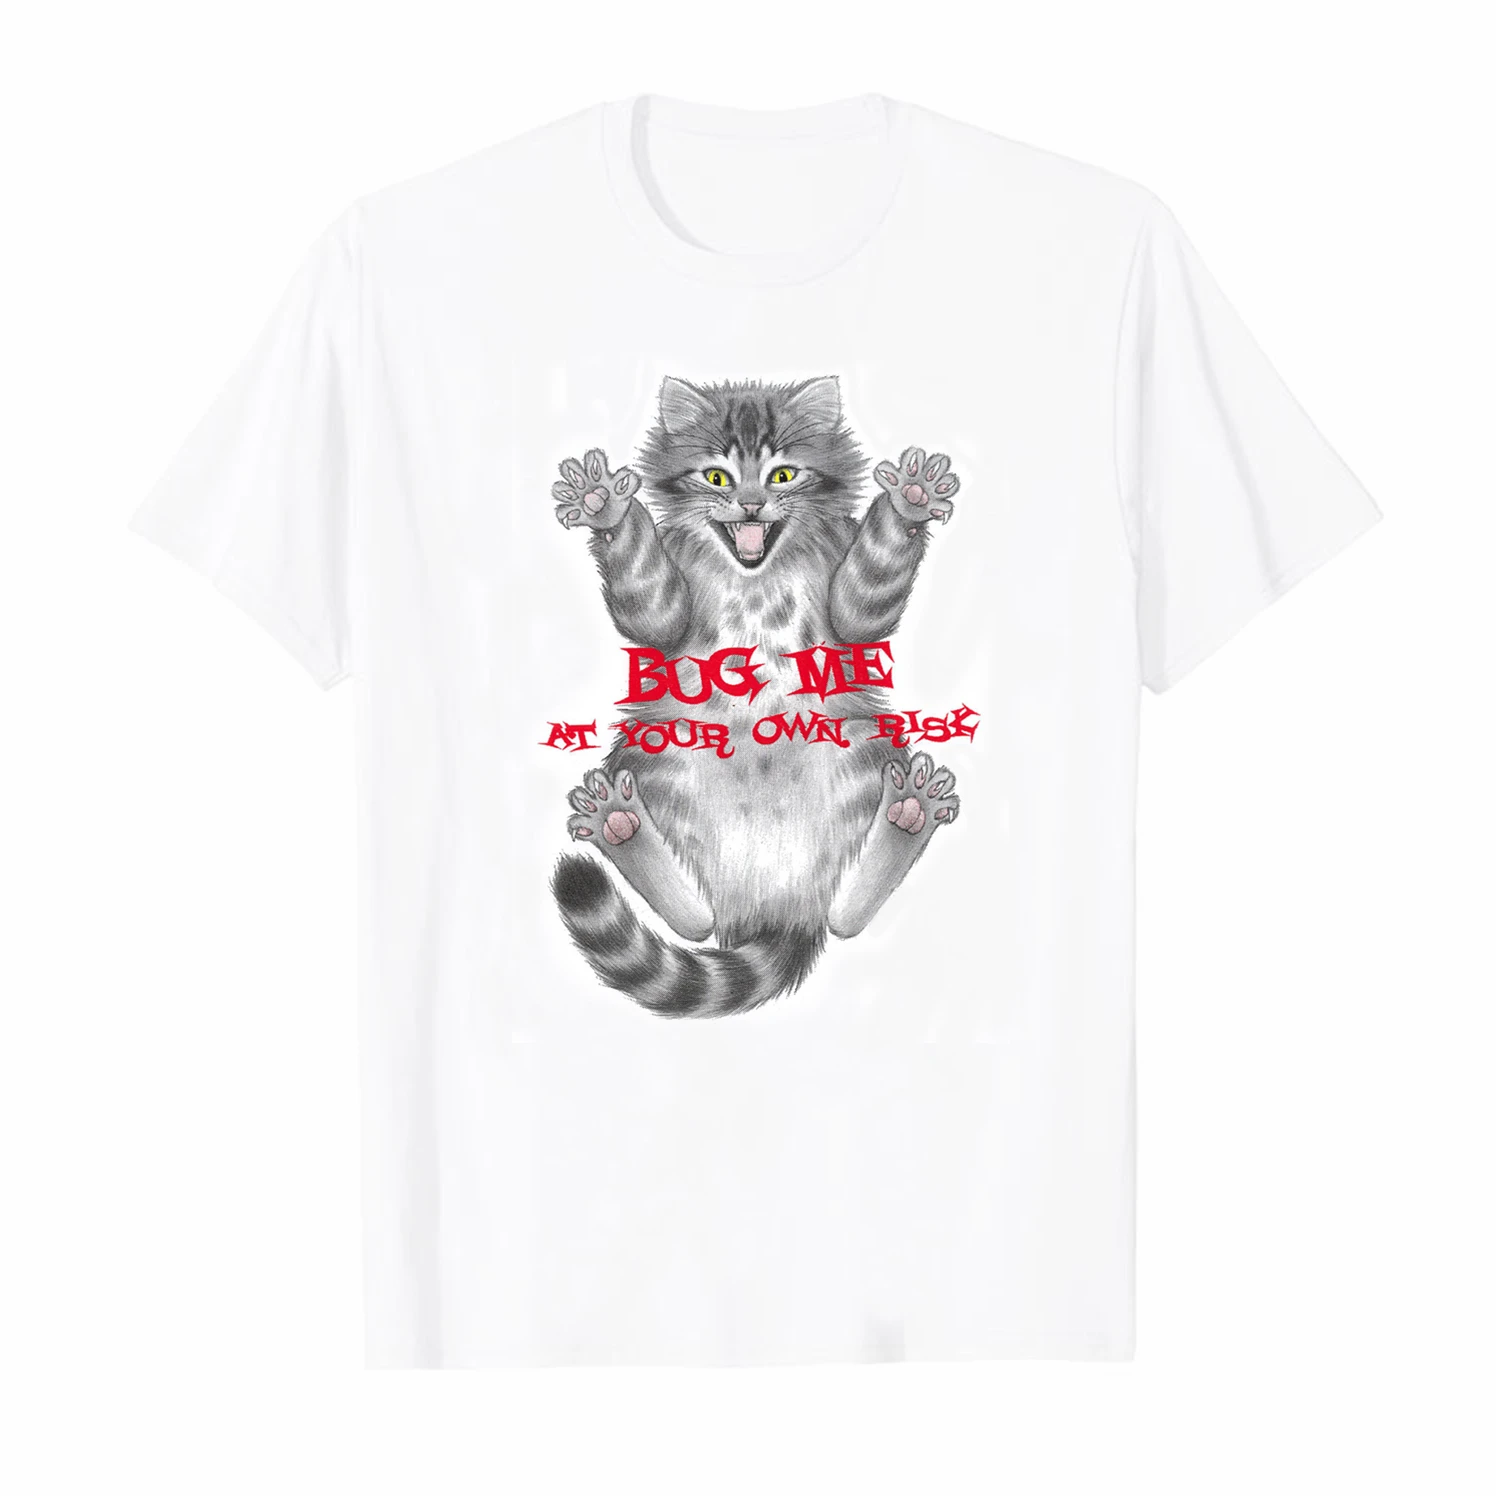 

Bug Me At Your Own Risk. Stressed Out Cat Funny Graphic Mens T-Shirt. Summer Cotton Short Sleeve O-Neck Unisex T Shirt New S-3XL